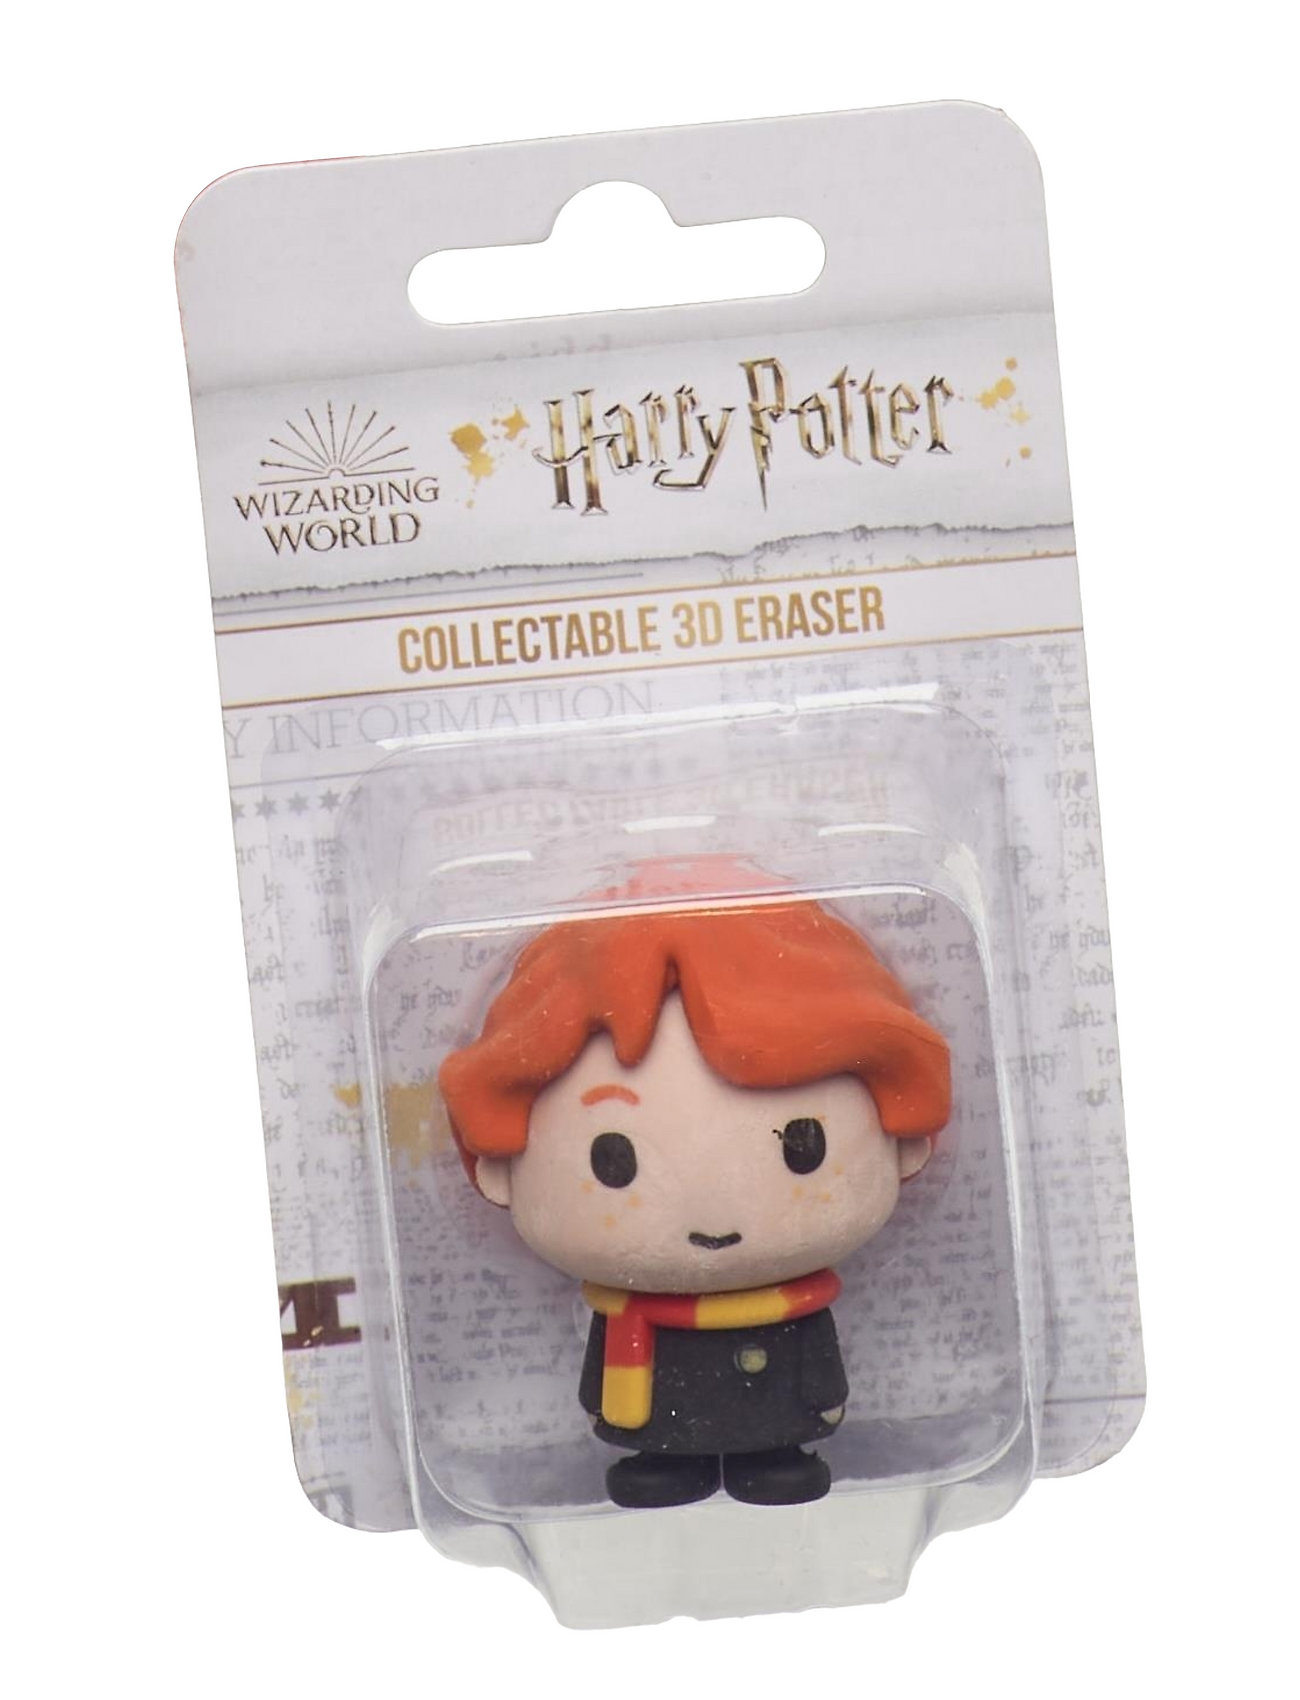 Harry Potter 3D Full Body Ron Eraser Toys Creativity Drawing & Crafts Drawing Stati Ry Multi/mönstrad Harry Potter